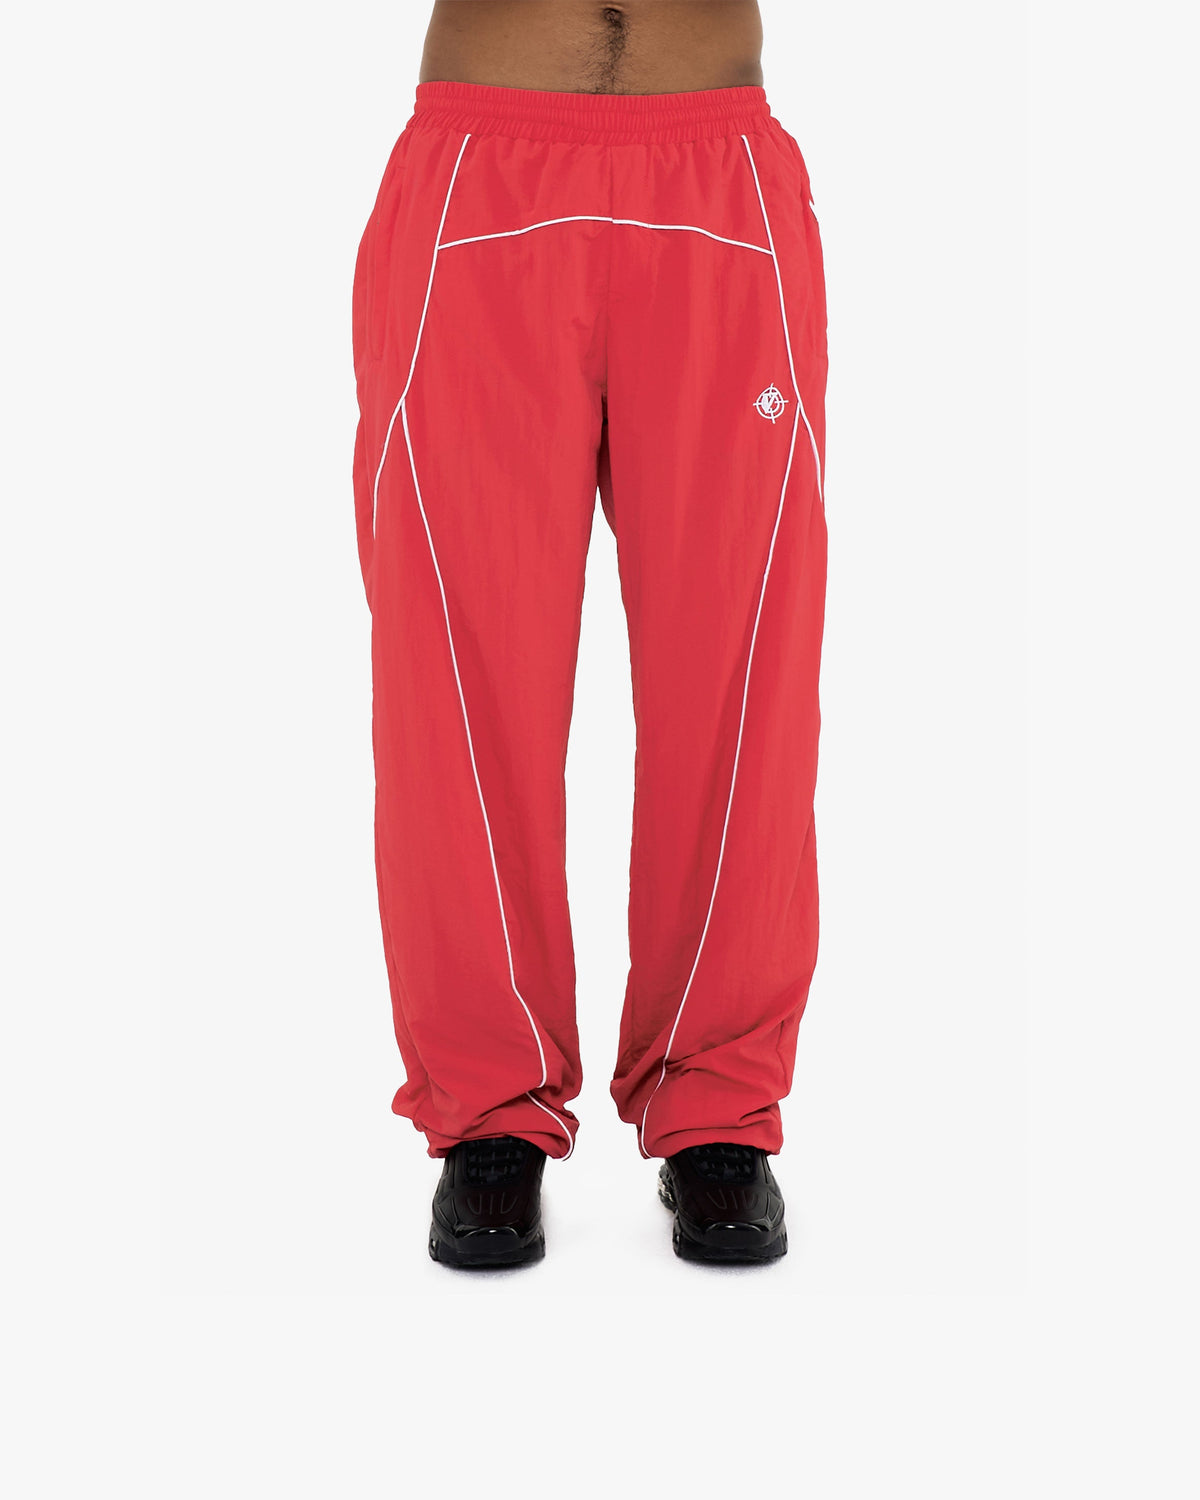 TRACK PANTS RED